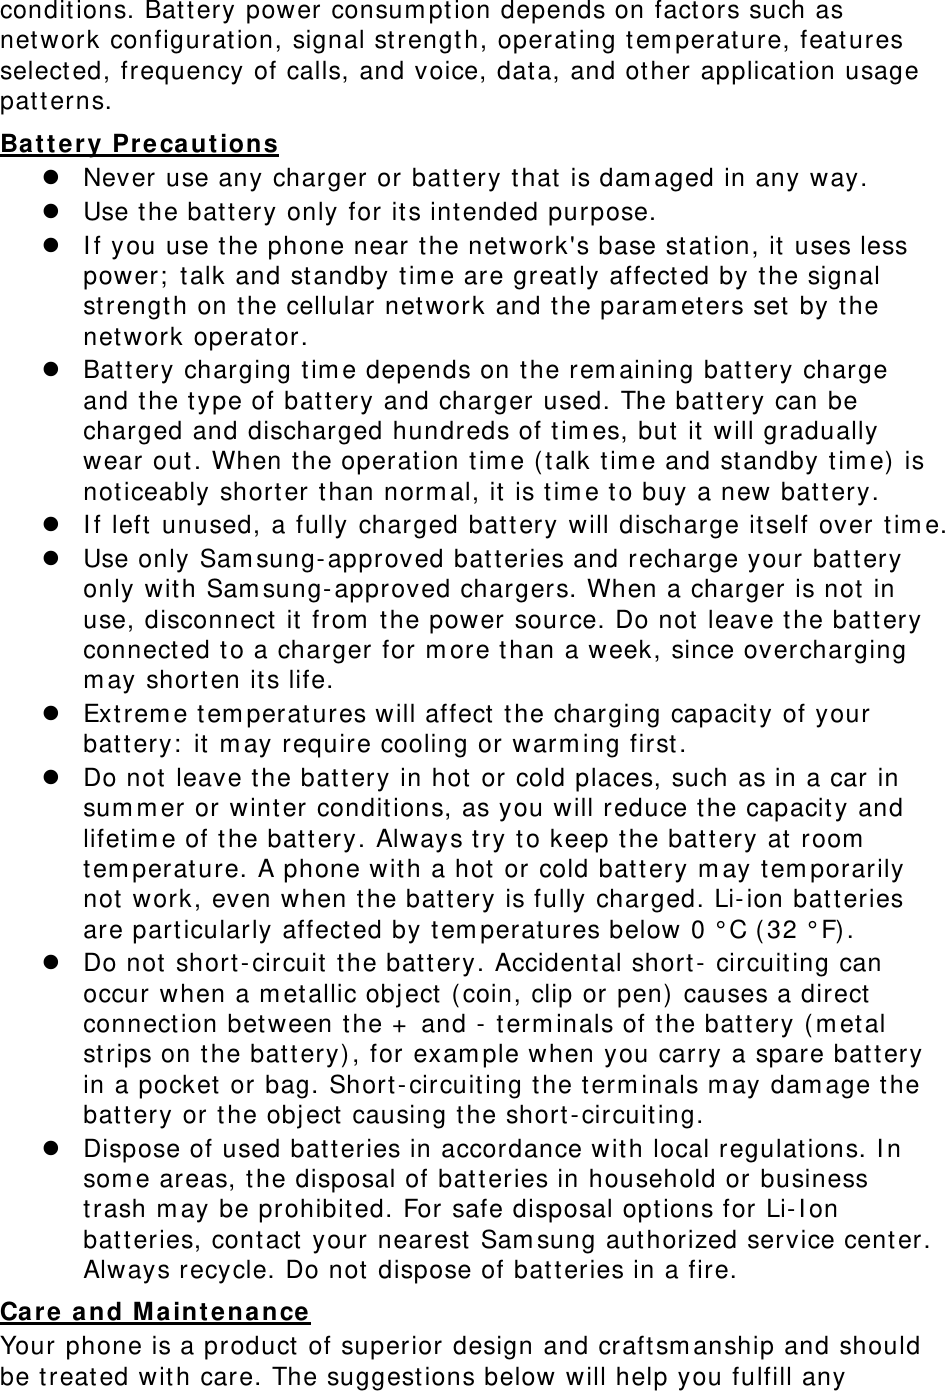 conditions. Battery power consum pt ion depends on fact ors such as network configuration, signal st rength, operating t em perat ure, feat ures selected, frequency of calls, and voice, data, and ot her application usage patt erns.   Ba t t er y Pr ecaut ions  Never use any charger or batt ery t hat  is dam aged in any way.  Use the batt ery only for its int ended purpose.  I f you use t he phone near the network&apos;s base st ation, it uses less power;  t alk and st andby t im e are great ly affect ed by the signal strength on t he cellular net work and the param et ers set by the network operator.  Battery charging t im e depends on t he rem aining bat t ery charge and t he type of battery and charger used. The bat t ery can be charged and discharged hundreds of t im es, but  it  will gradually wear out . When t he operation t im e (talk t im e and st andby tim e) is noticeably short er than norm al, it  is t im e to buy a new battery.  I f left  unused, a fully charged batt ery will discharge itself over t im e.   Use only Sam sung- approved batteries and recharge your bat t ery only with Sam sung- approved chargers. When a charger is not  in use, disconnect  it from  t he power source. Do not leave t he bat t ery connect ed t o a charger for m ore than a week, since overcharging m ay short en its life.  Ext rem e t em perat ures will affect  t he charging capacity of your batt ery:  it m ay require cooling or warm ing first .  Do not leave t he batt ery in hot or cold places, such as in a car in sum m er or wint er conditions, as you will reduce the capacity and lifet im e of t he bat t ery. Always try t o keep t he batt ery at room  tem perat ure. A phone with a hot or cold bat t ery m ay t em porarily not work, even when t he bat t ery is fully charged. Li-ion bat t eries are part icularly affect ed by tem peratures below 0 ° C (32 ° F).  Do not short - circuit t he bat t ery. Accident al short-  circuiting can occur when a m et allic object  (coin, clip or pen)  causes a direct  connect ion bet ween the +  and - t erm inals of the bat t ery ( m etal strips on t he batt ery) , for exam ple when you carry a spare batt ery in a pocket or bag. Short- circuiting t he term inals m ay dam age t he batt ery or t he obj ect  causing the short- circuiting.  Dispose of used bat t eries in accordance with local regulat ions. I n som e areas, t he disposal of batt eries in household or business trash m ay be prohibited. For safe disposal opt ions for Li-I on batt eries, cont act  your nearest  Sam sung authorized service center. Always recycle. Do not dispose of batt eries in a fire. Care  a nd M a inten ance  Your phone is a product  of superior design and craft sm anship and should be treated with care. The suggest ions below will help you fulfill any 